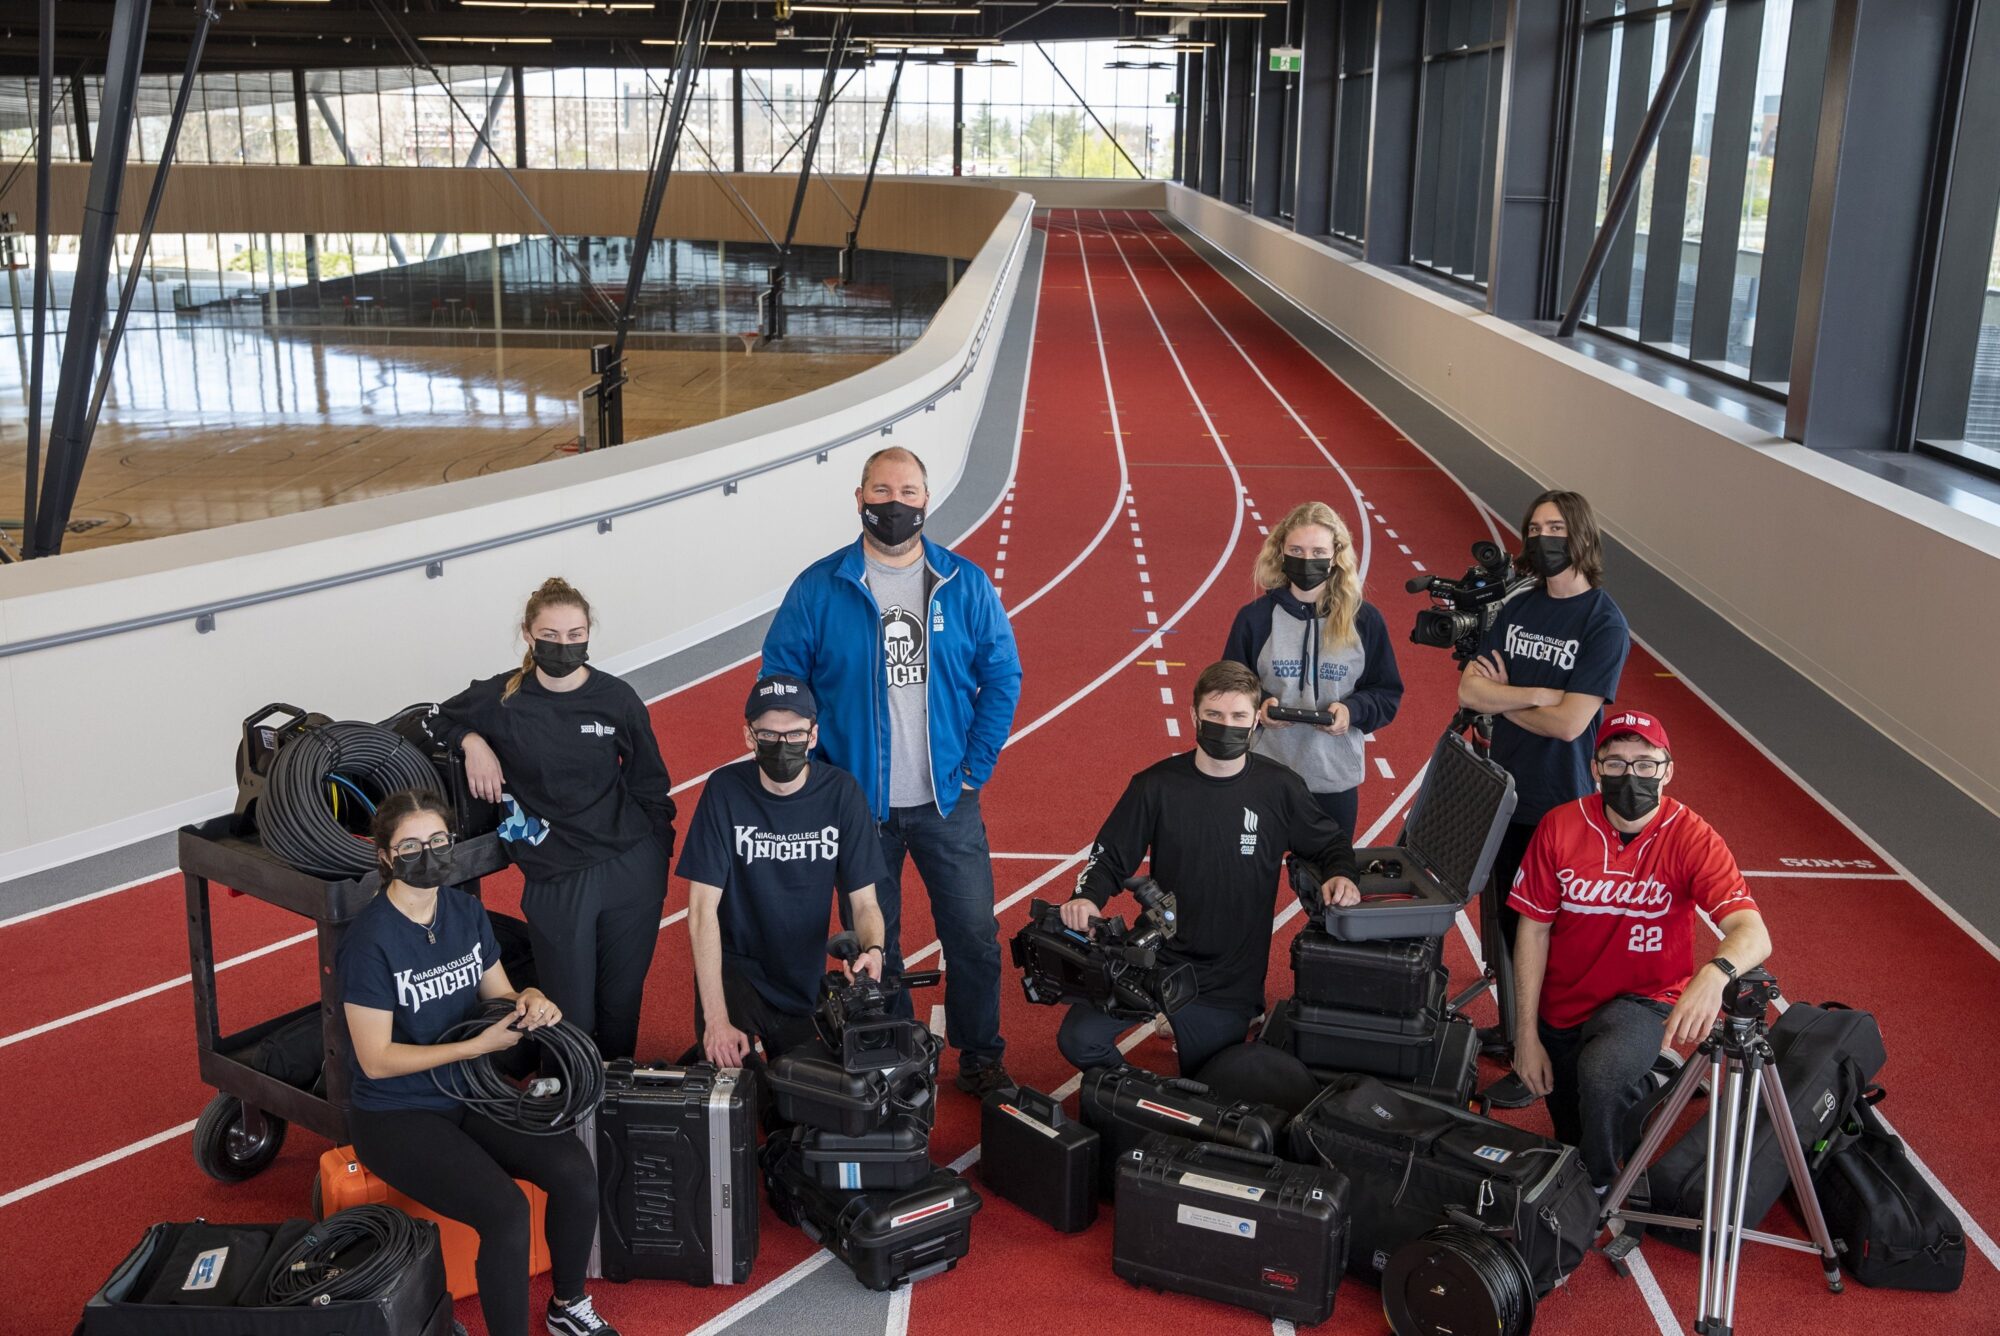 a group of 8 people stand together on an indoor sports track with production equipment